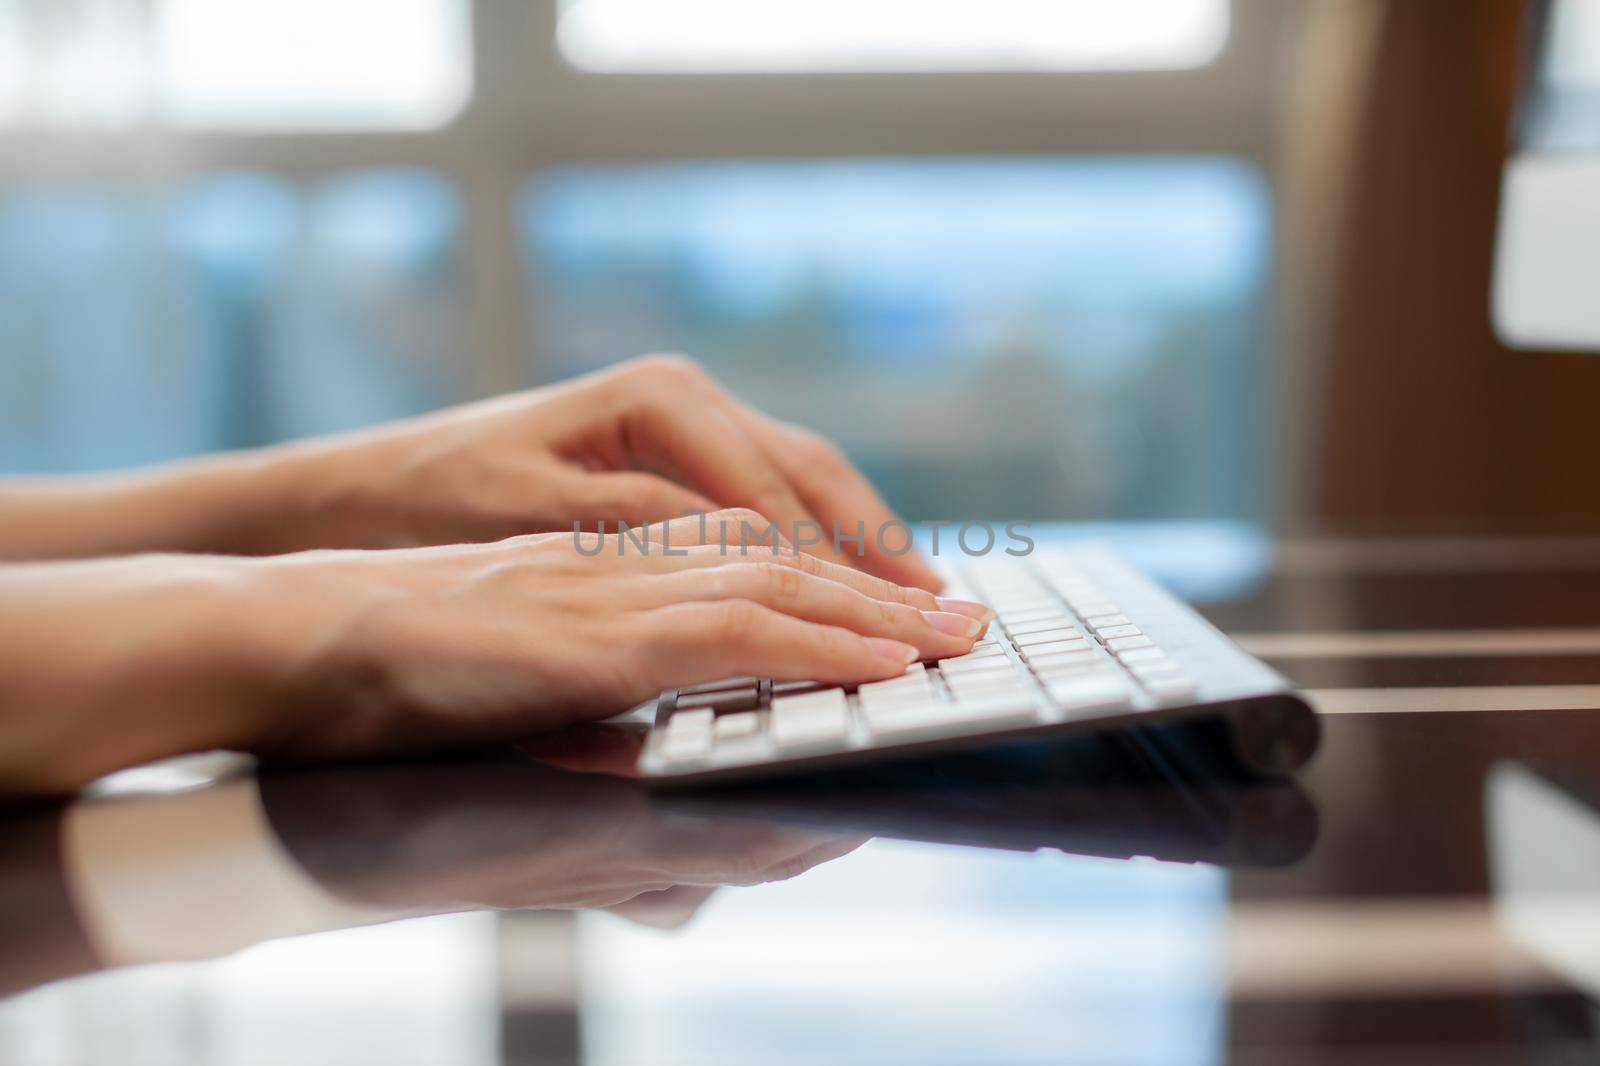 Female hands typing text on the keyboard while exchanging messages with friends via social networks using a computer laptop. A female office worker checks her email while sitting at a desk.